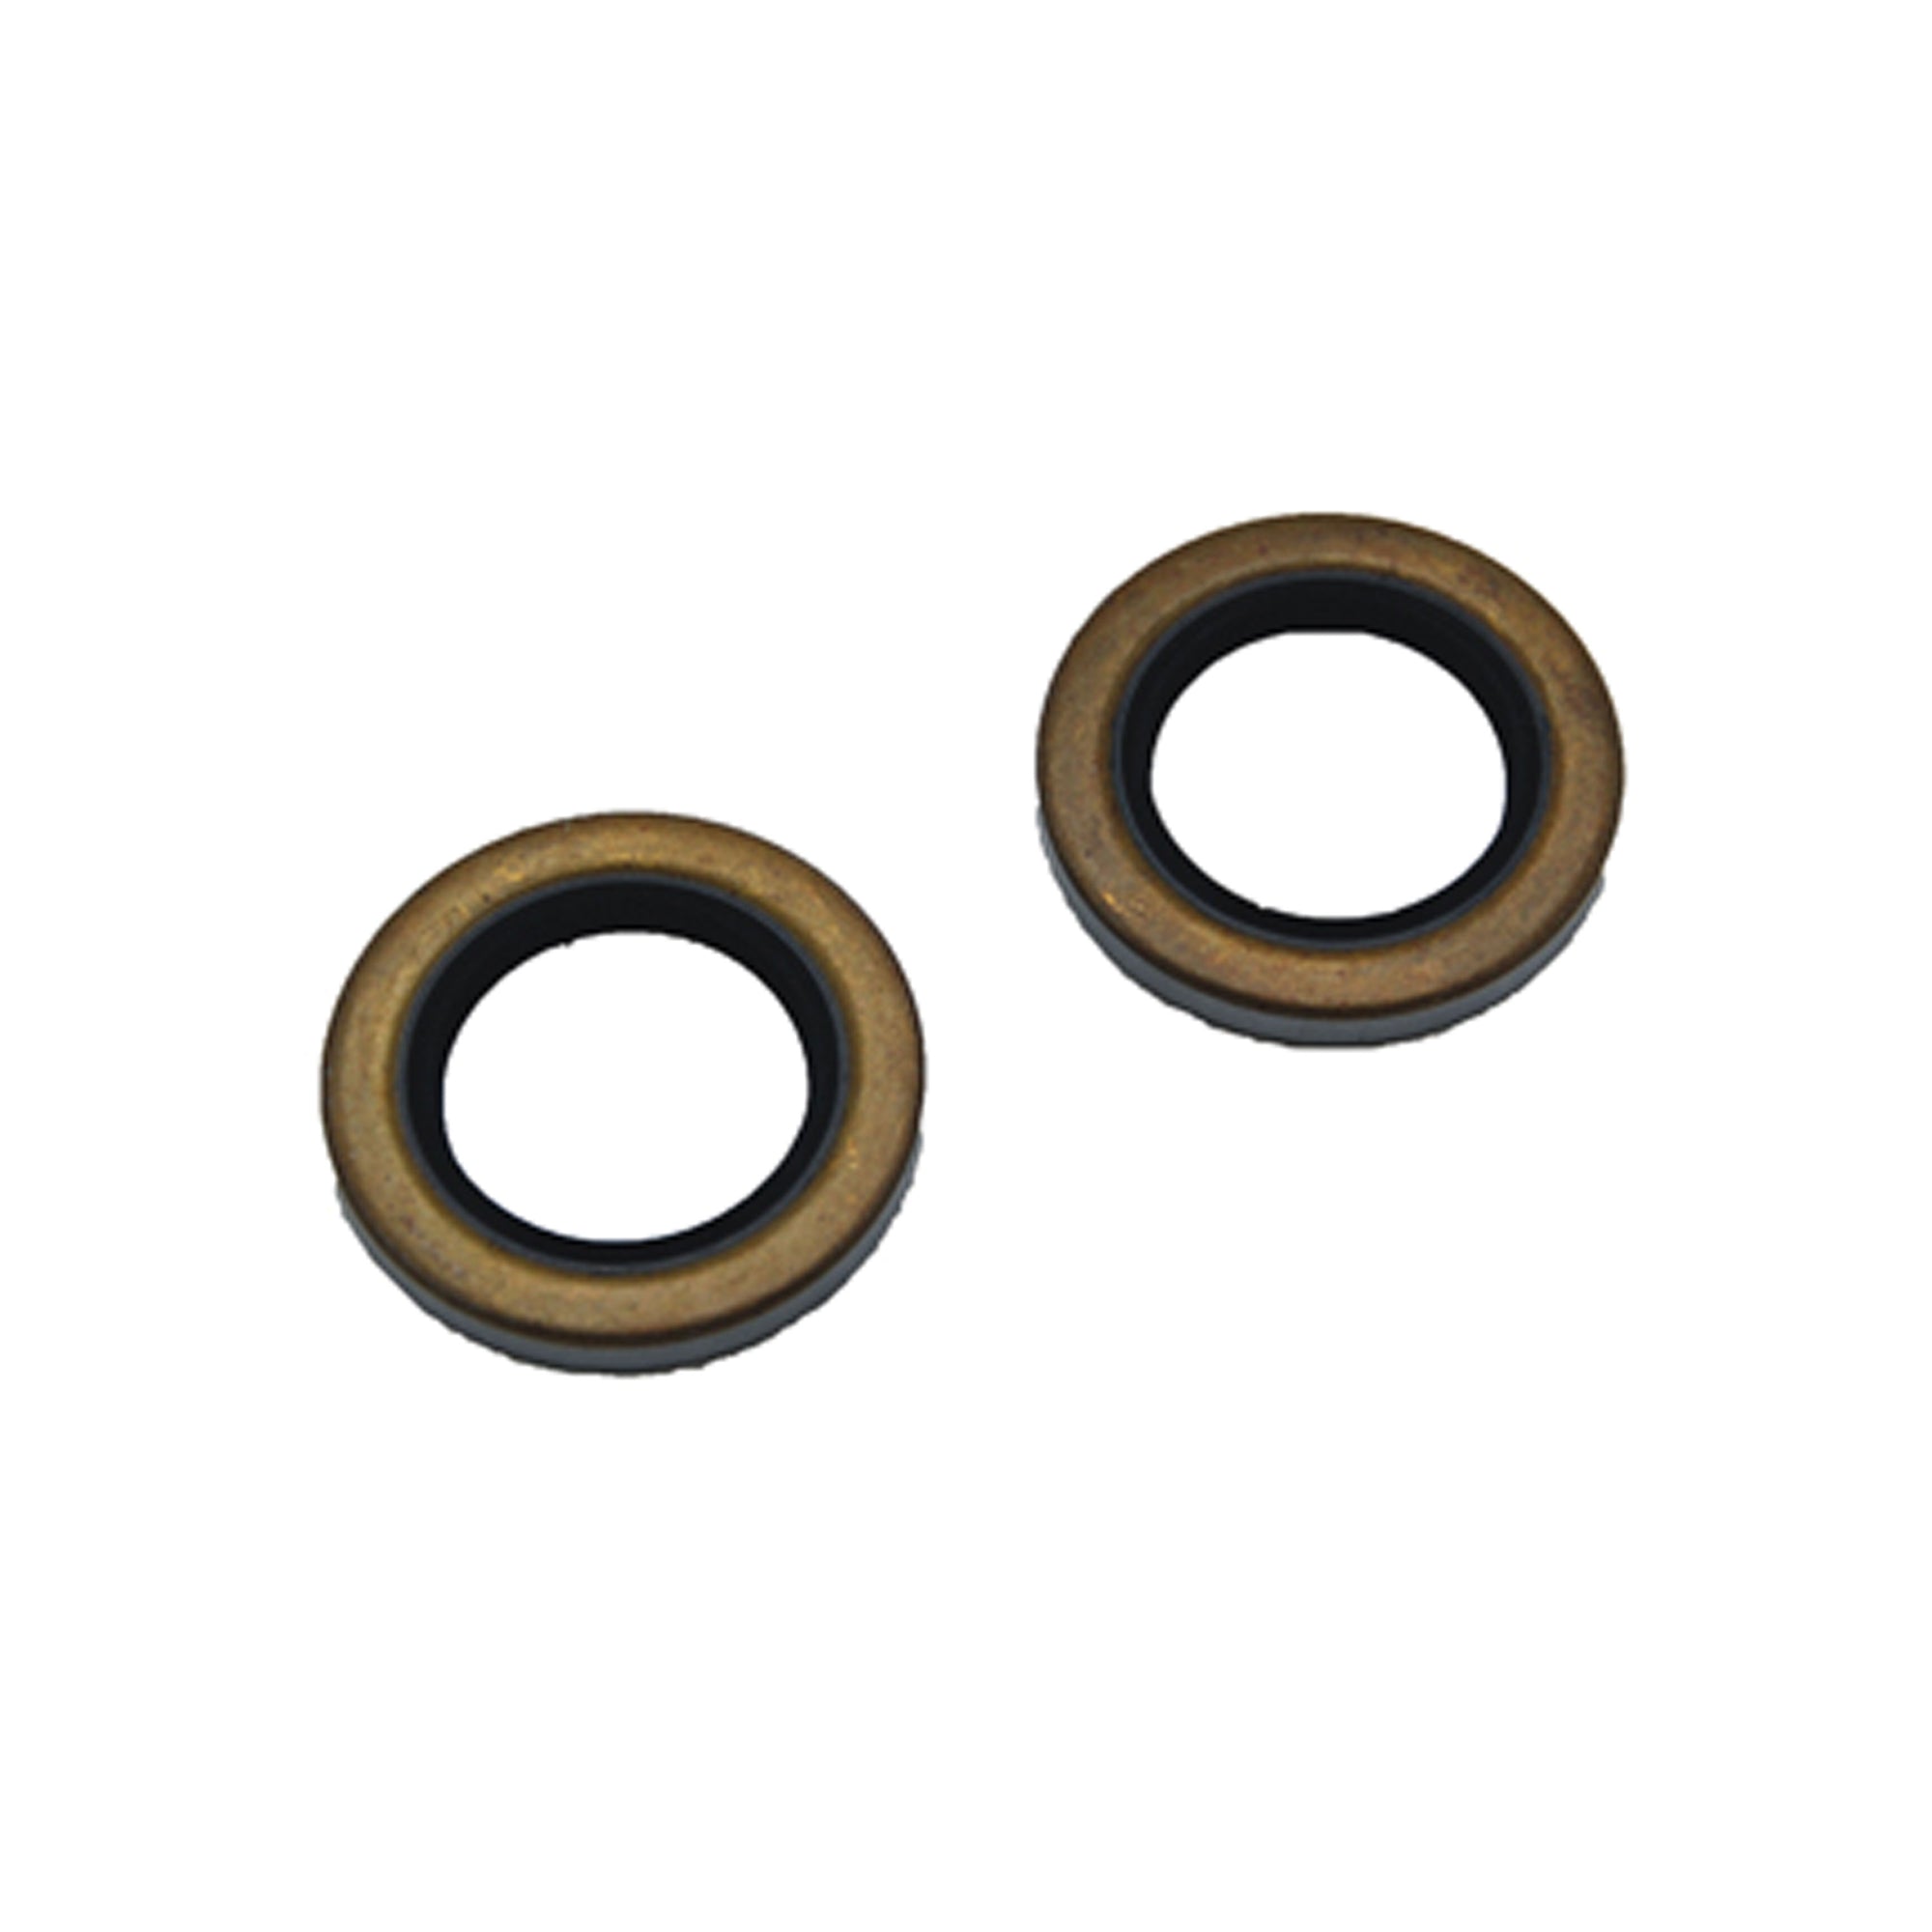 AP Products 014-181621-2 Seal for 1,250 lb. Axle with 1" Spindle ID 1.249" - 2 Pack